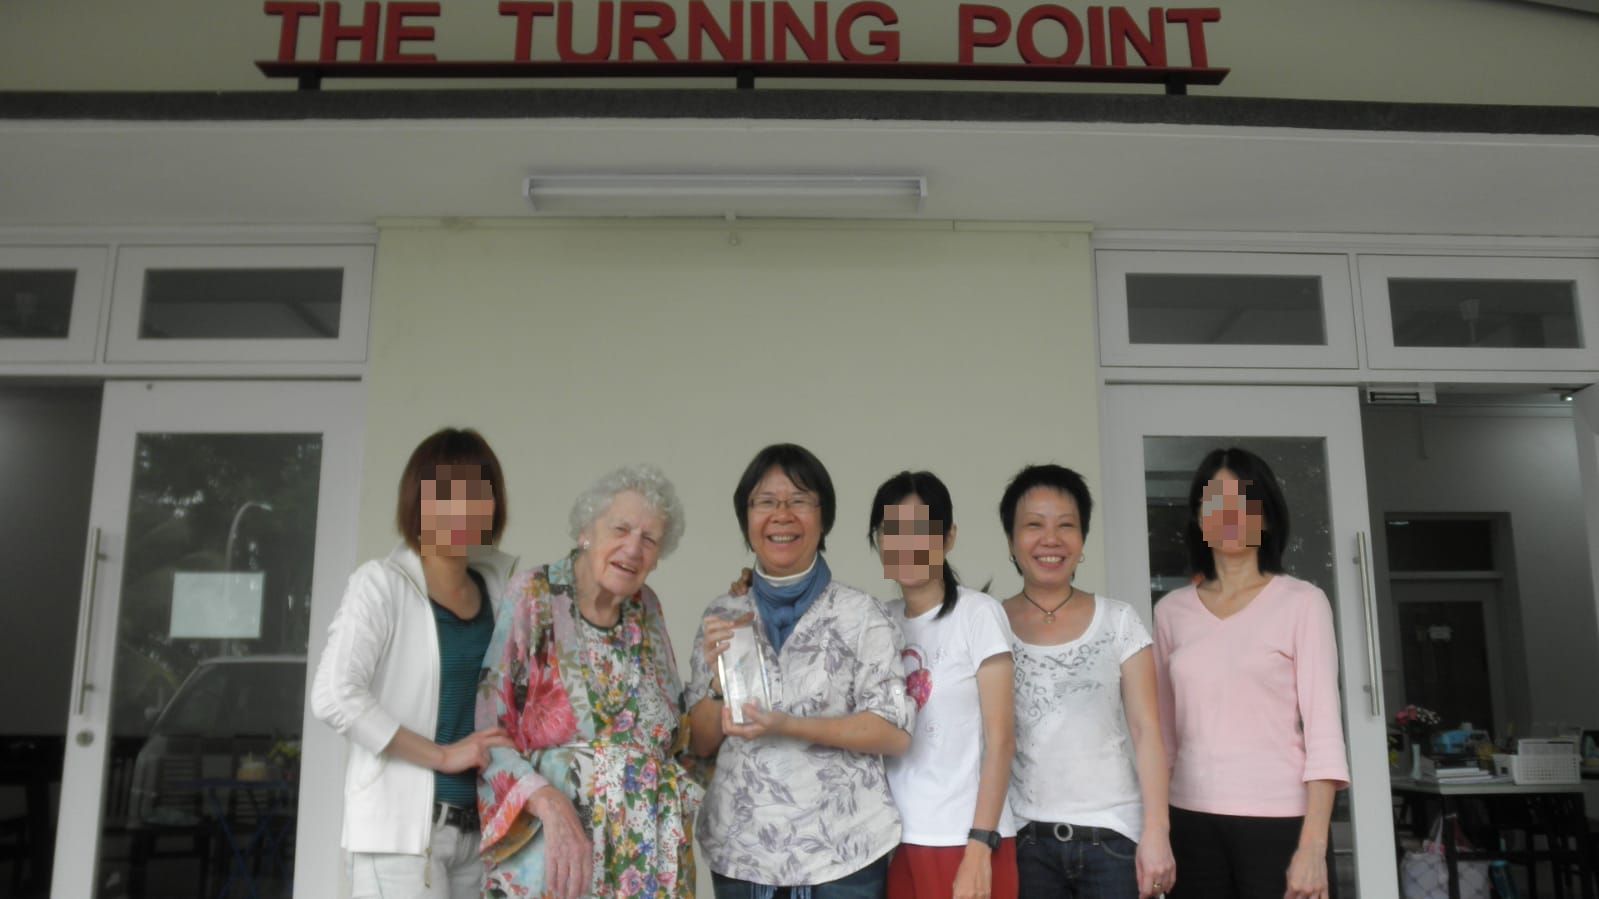 Lim (second from right) experienced God’s love through the people she met at The Turning Point, was transformed and is now giving her life to serving others like her. She is pictured here with founder Florence Ng (fourth from right) and the late Felicity Foster-Carter, who was the first DRC volunteer of the Prisons Department. Faces have been blurred to protect their identities. Photo courtesy of Florence Ng.